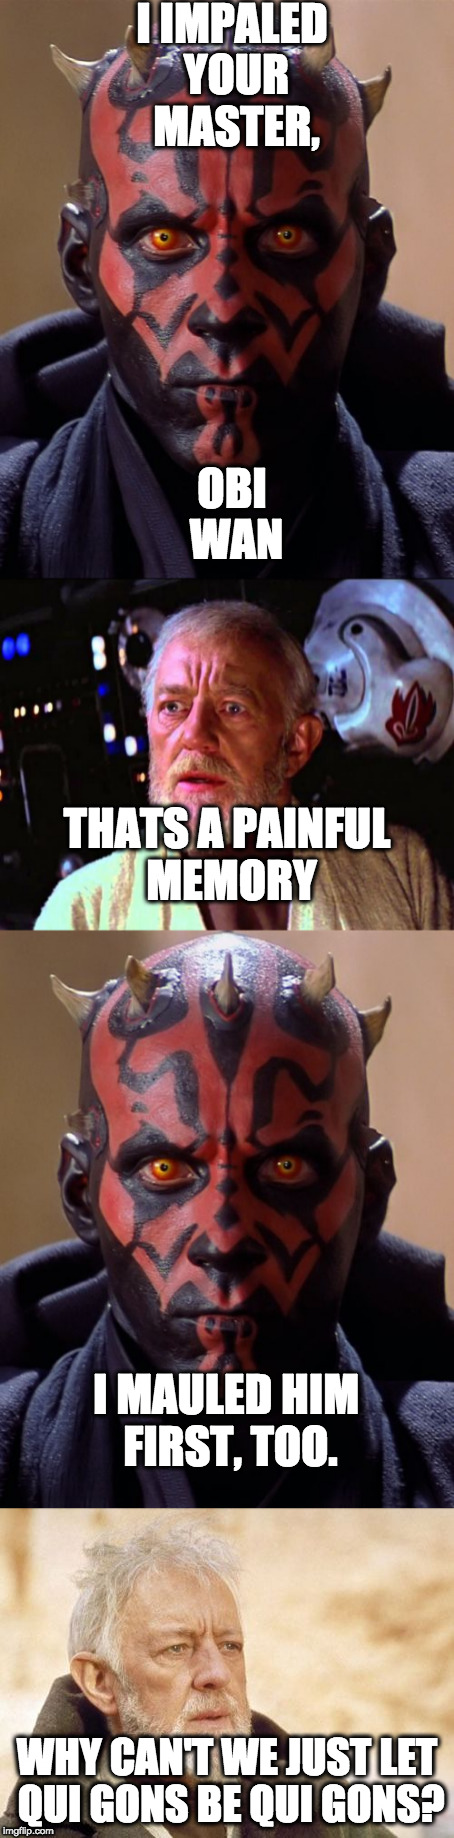 Darth Maul comes back to taunt Obi Wan | I IMPALED YOUR MASTER, OBI WAN; THATS A PAINFUL MEMORY; I MAULED HIM FIRST, TOO. WHY CAN'T WE JUST LET QUI GONS BE QUI GONS? | image tagged in darth maul,obi wan kenobi,funny memes | made w/ Imgflip meme maker